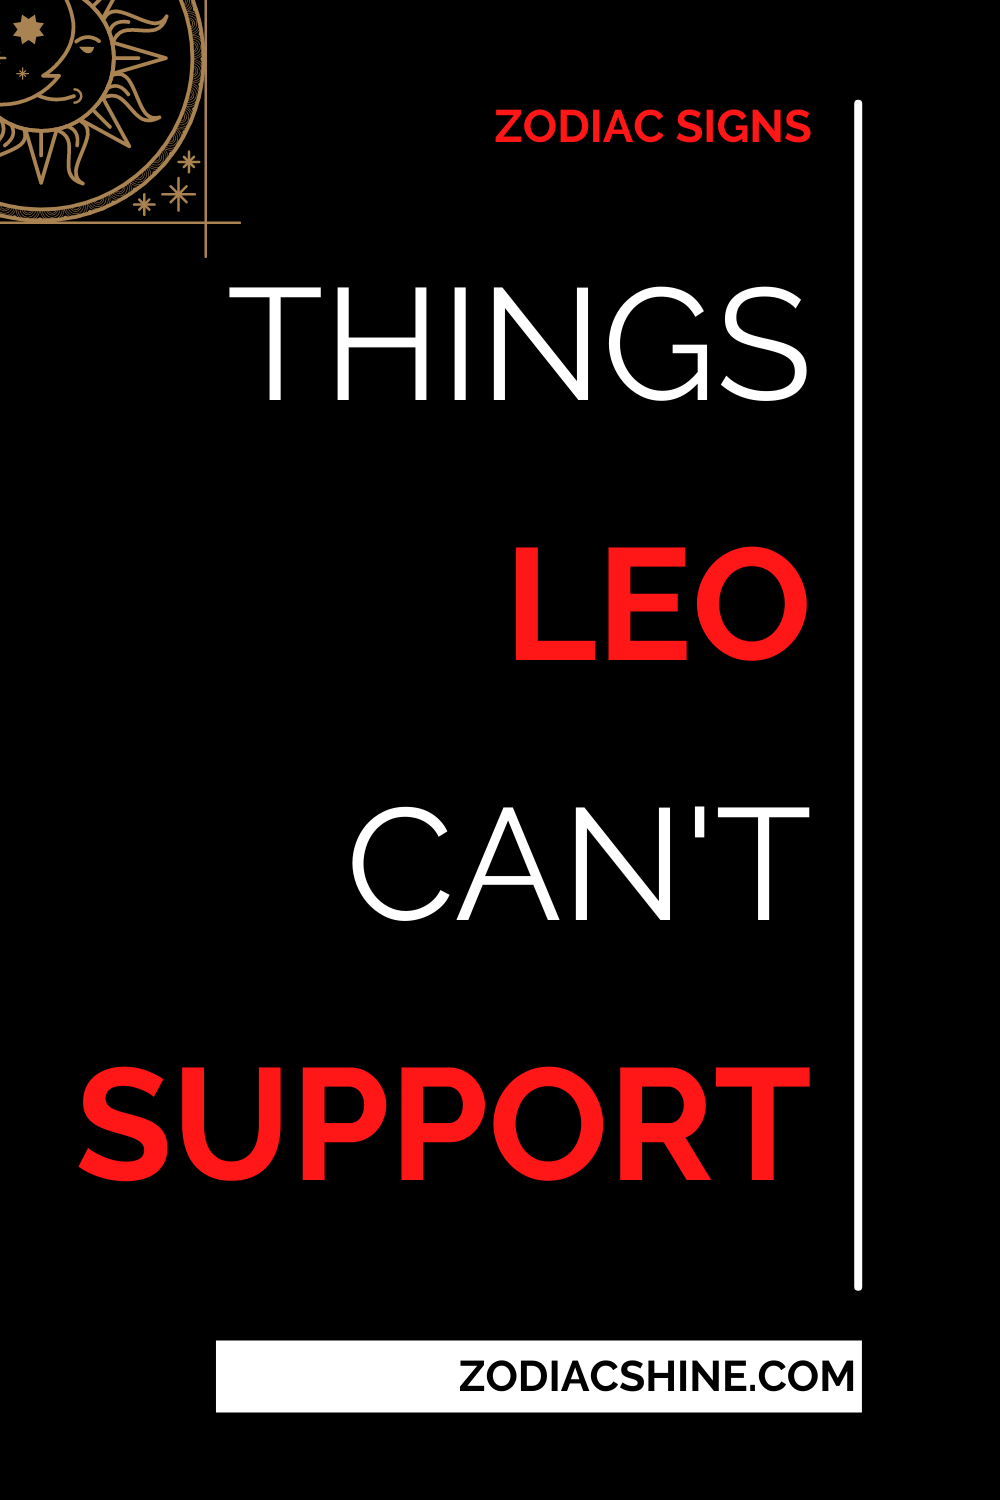 Things Leo Can't Support